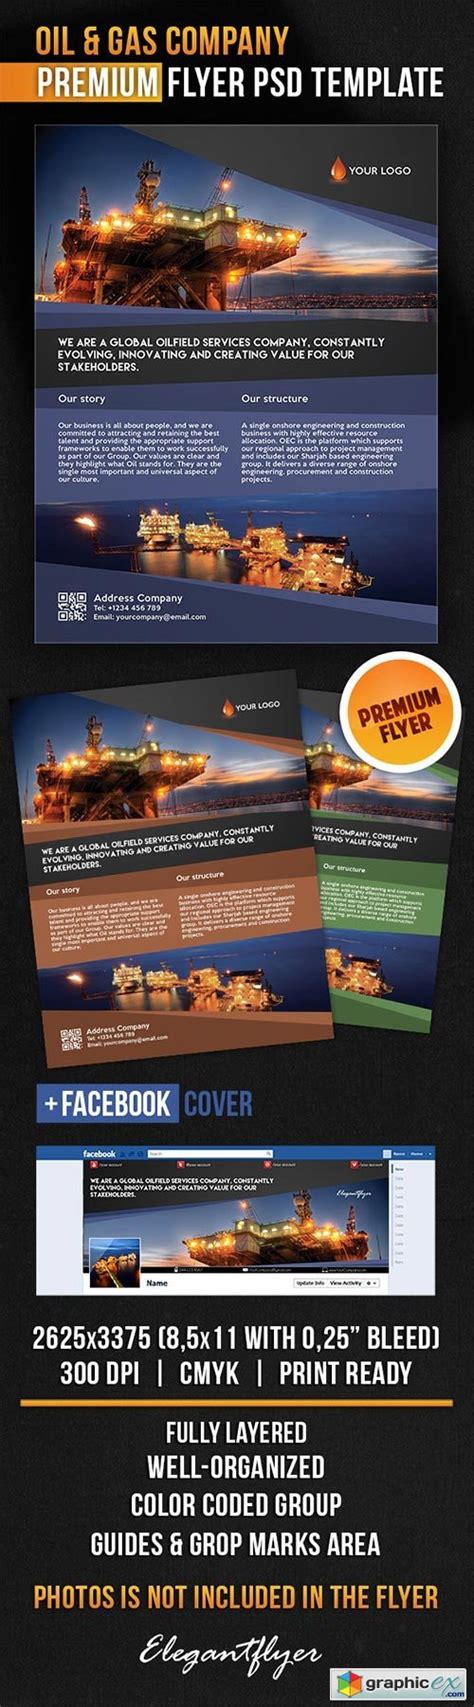 Oil And Gas Company Flyer Psd Template Facebook Cover Free Download